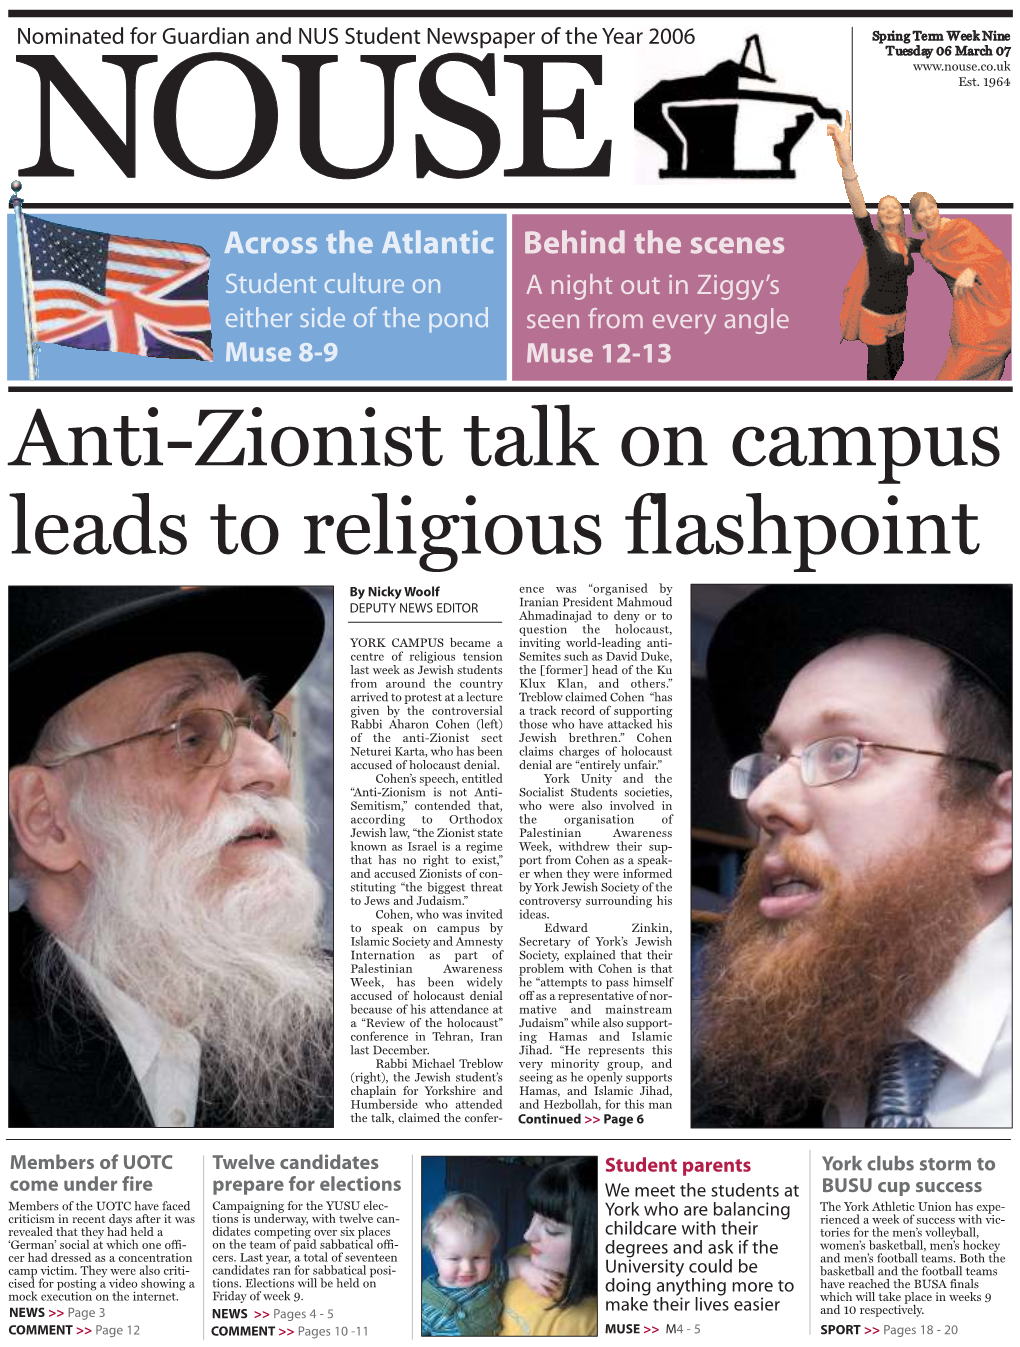 Anti-Zionist Talk on Campus Leads to Religious Flashpoint